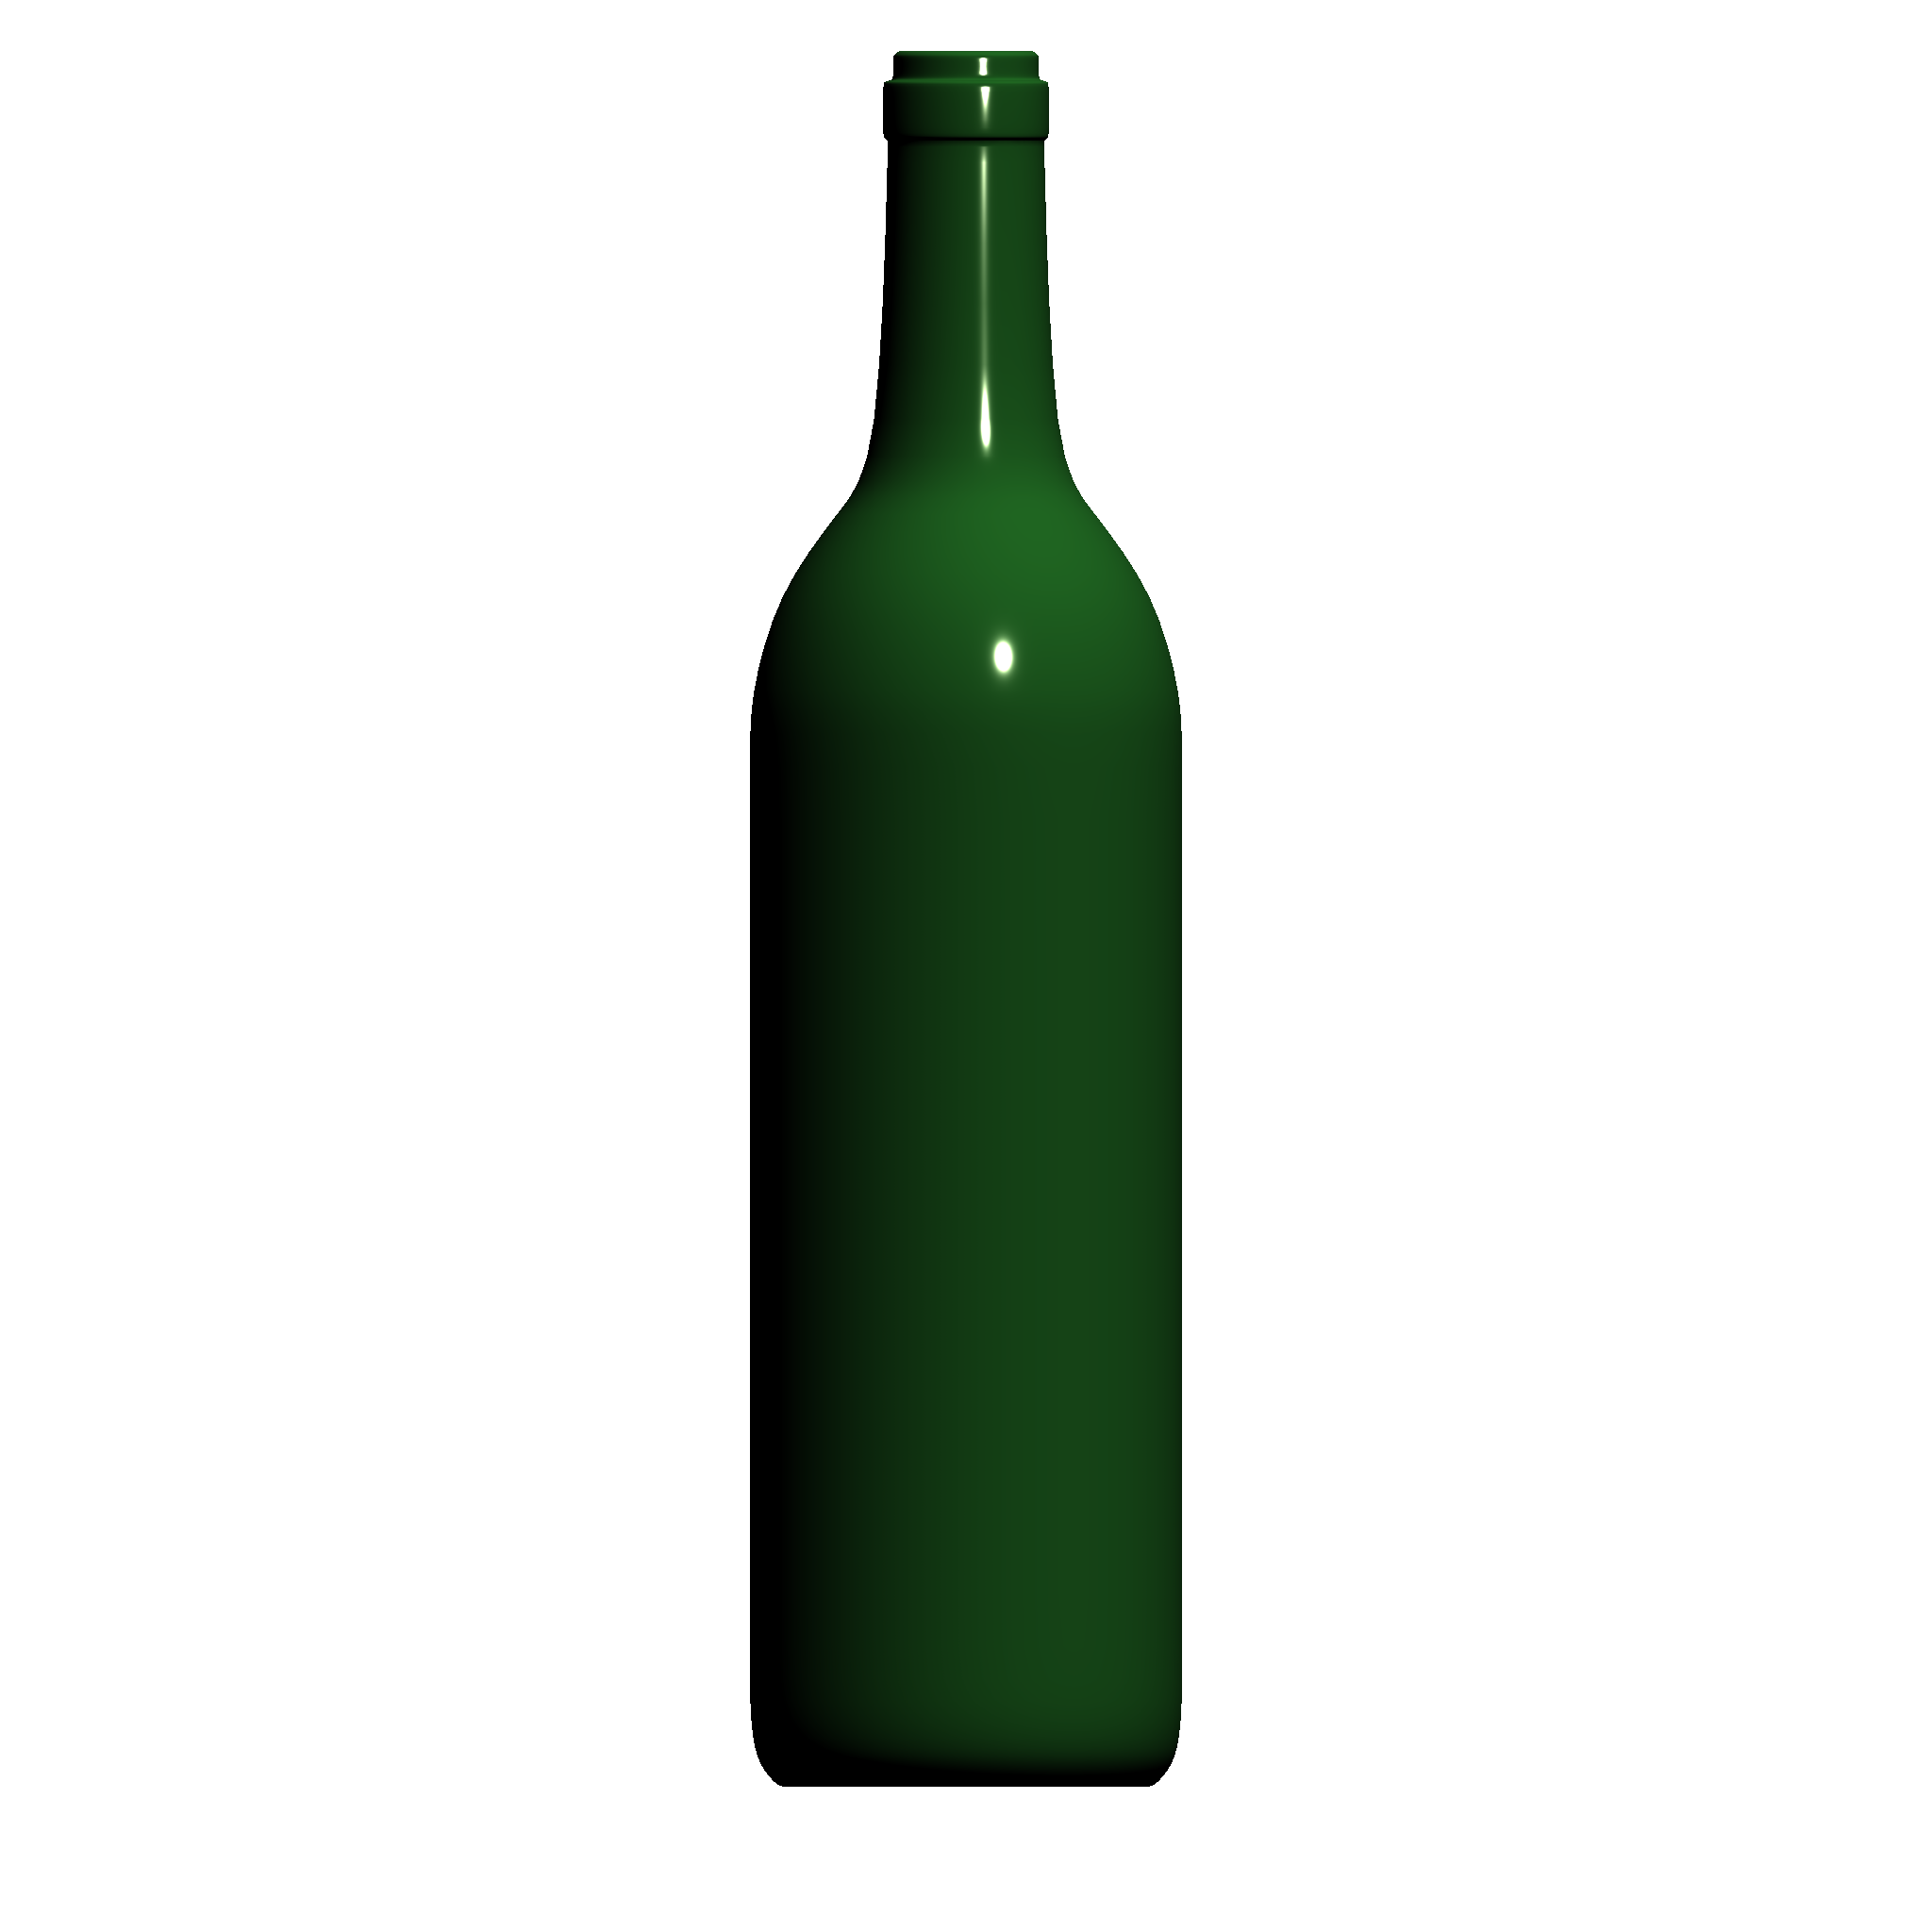 http://drinking-games-ideas.com/wp-content/uploads/2020/08/drinking-games-ideas-bottle.png